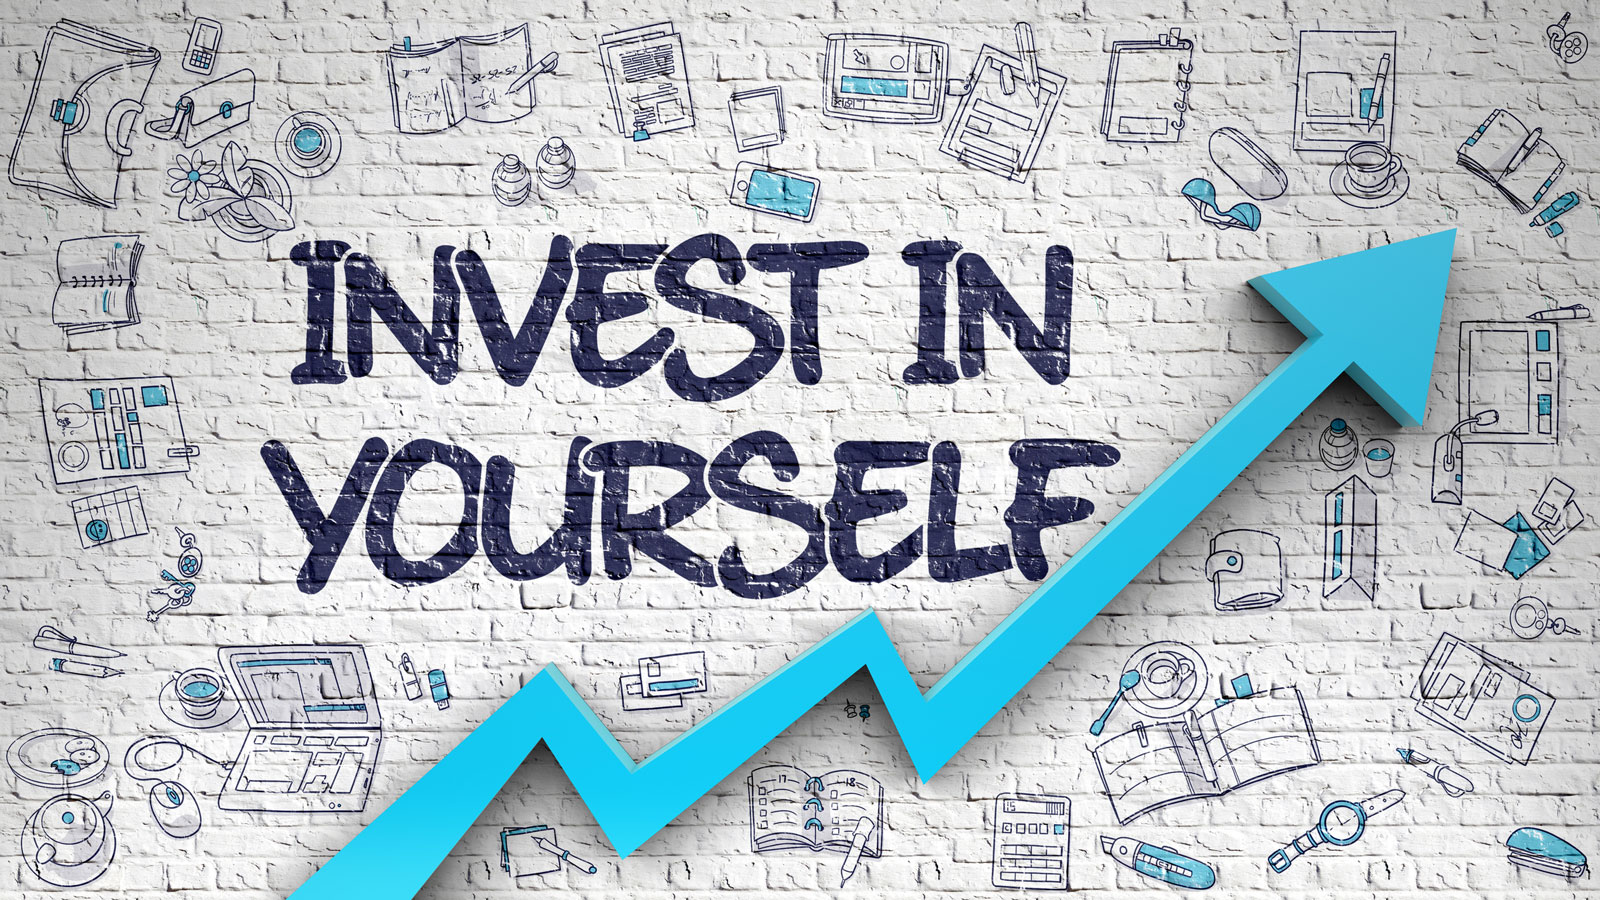 Invest in Yourself message on brick background with upward trend chart and social financial icons